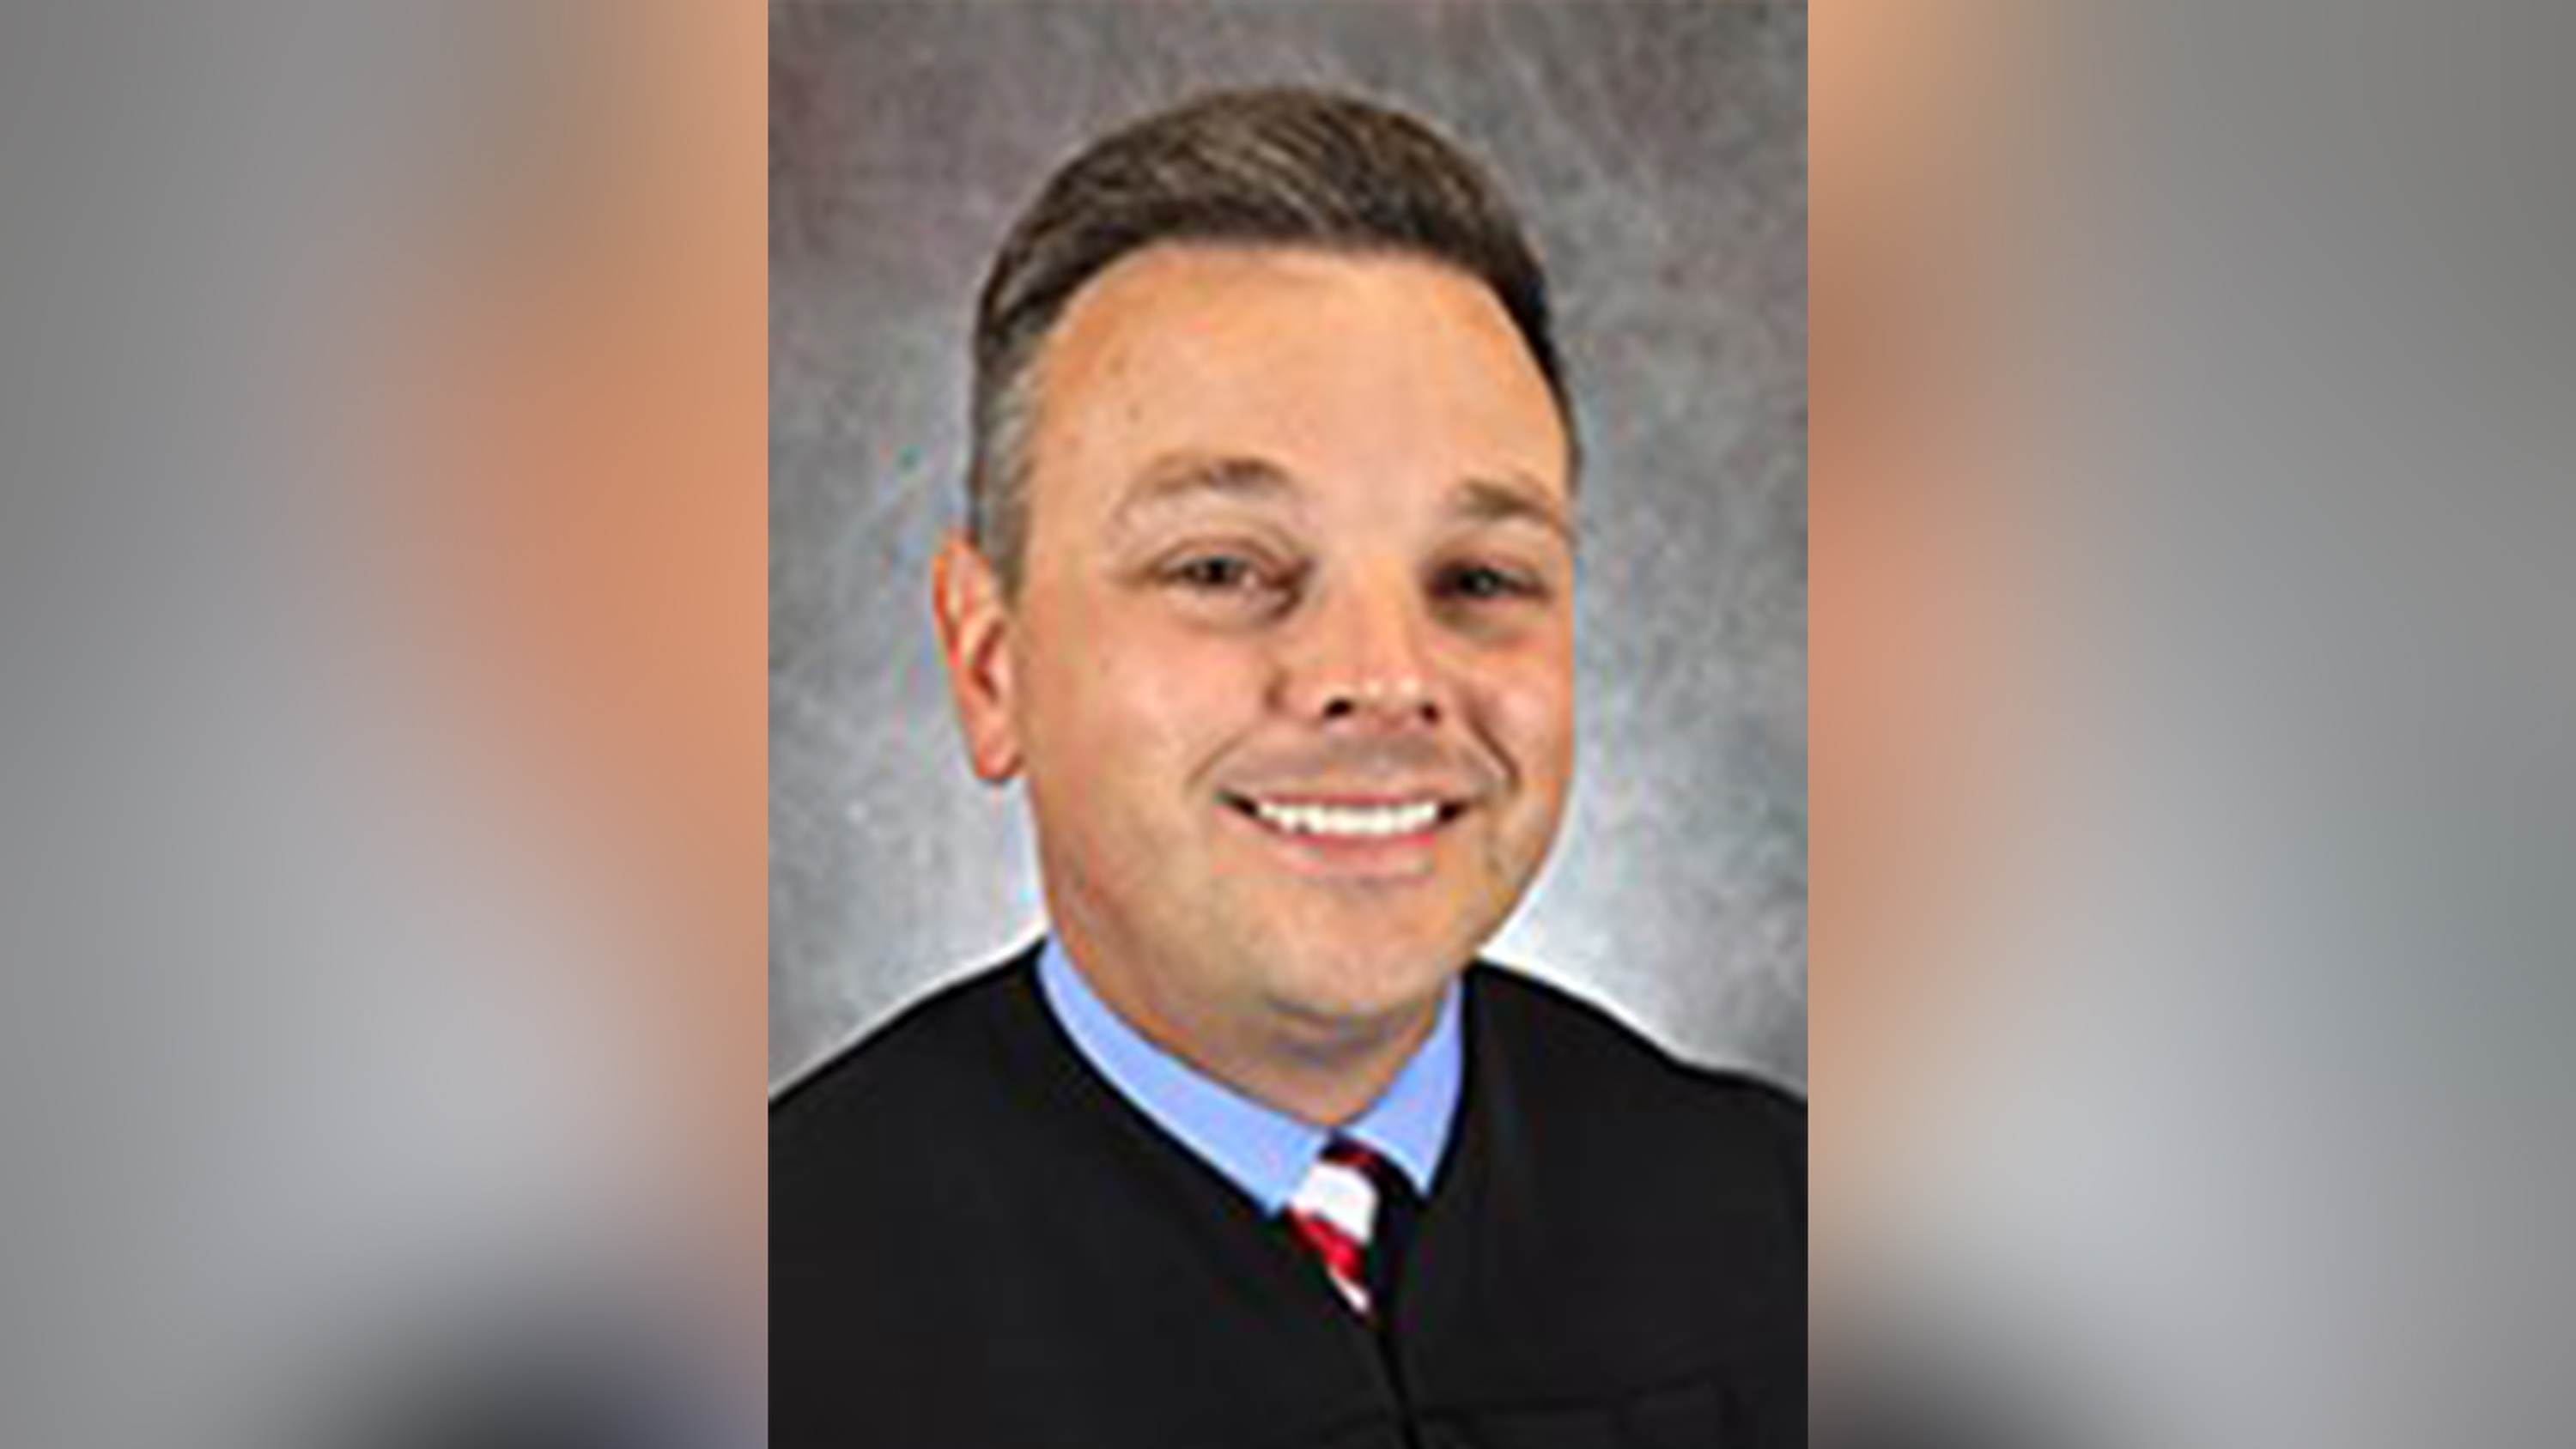 District Judge Brian Crick (Kentucky Court of Justice)